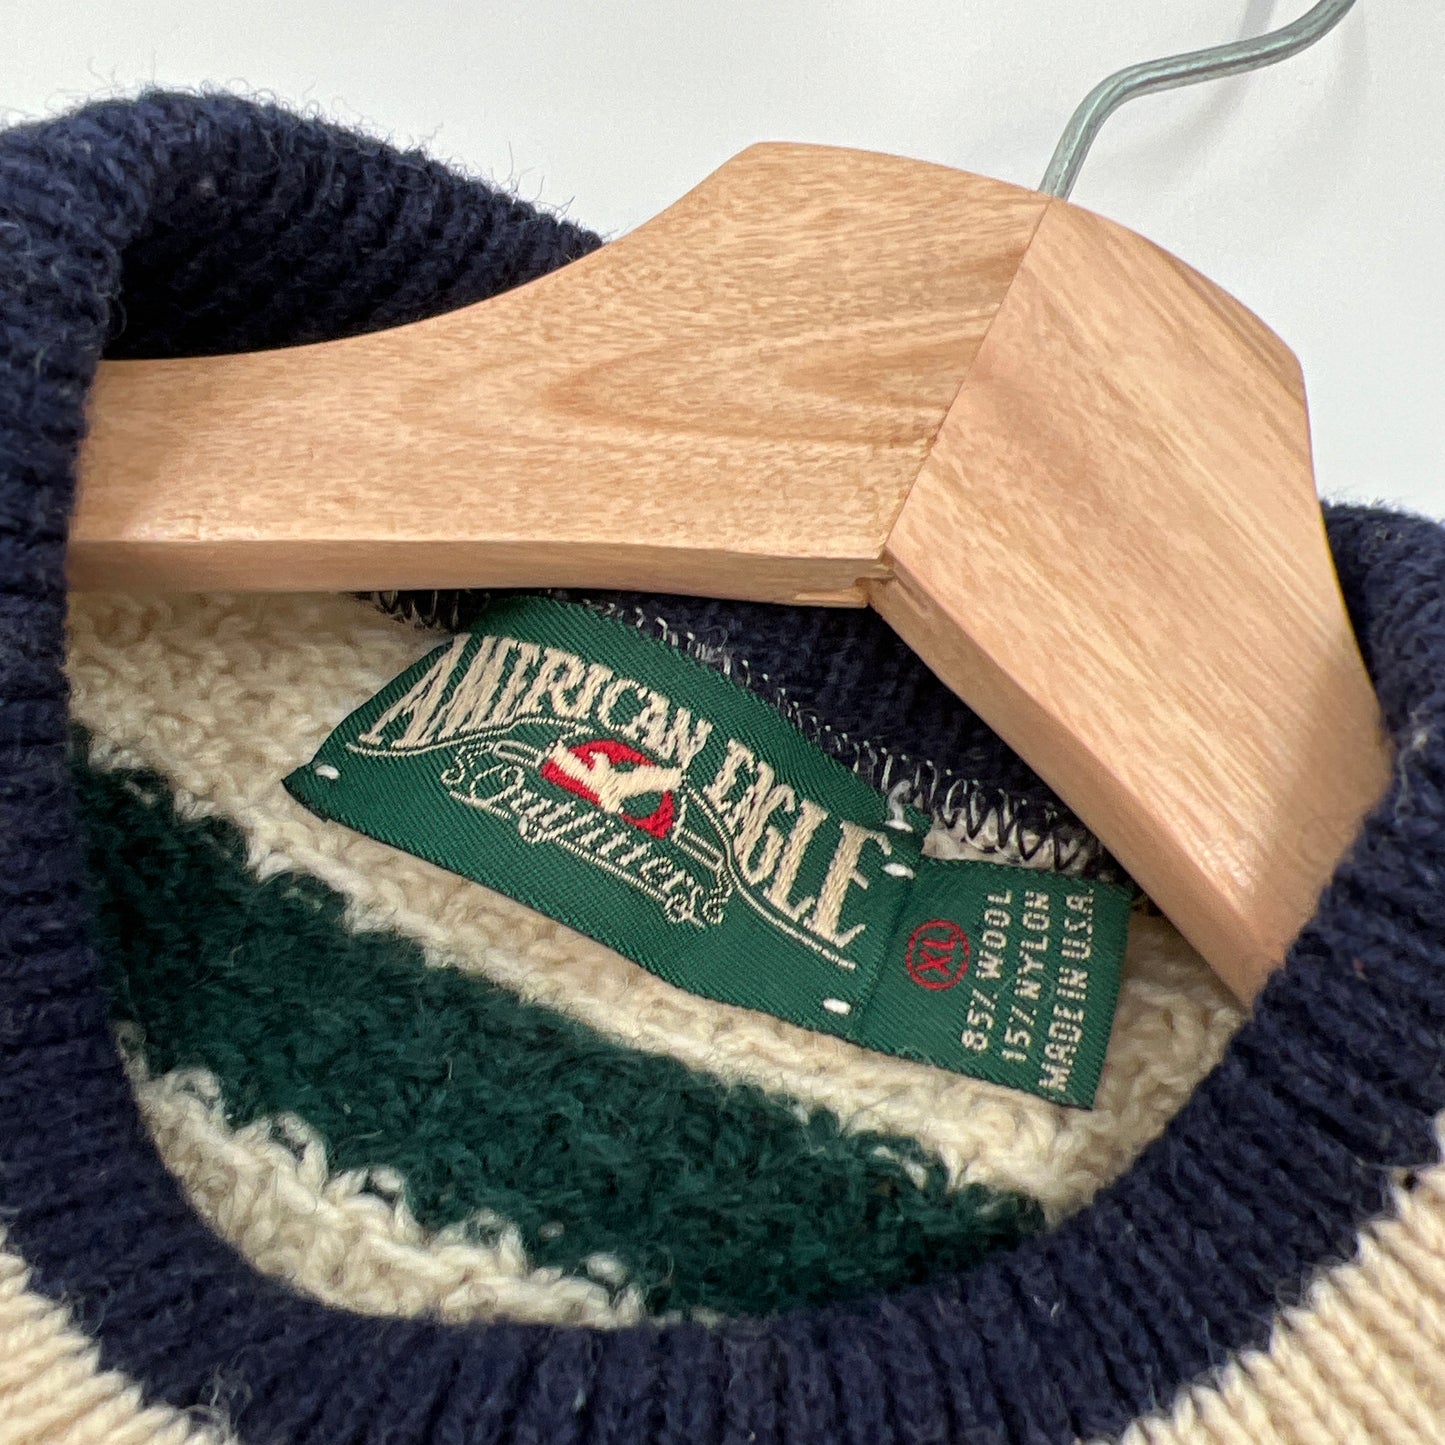 SOLD - Vintage American Eagle Wool Sweater XL